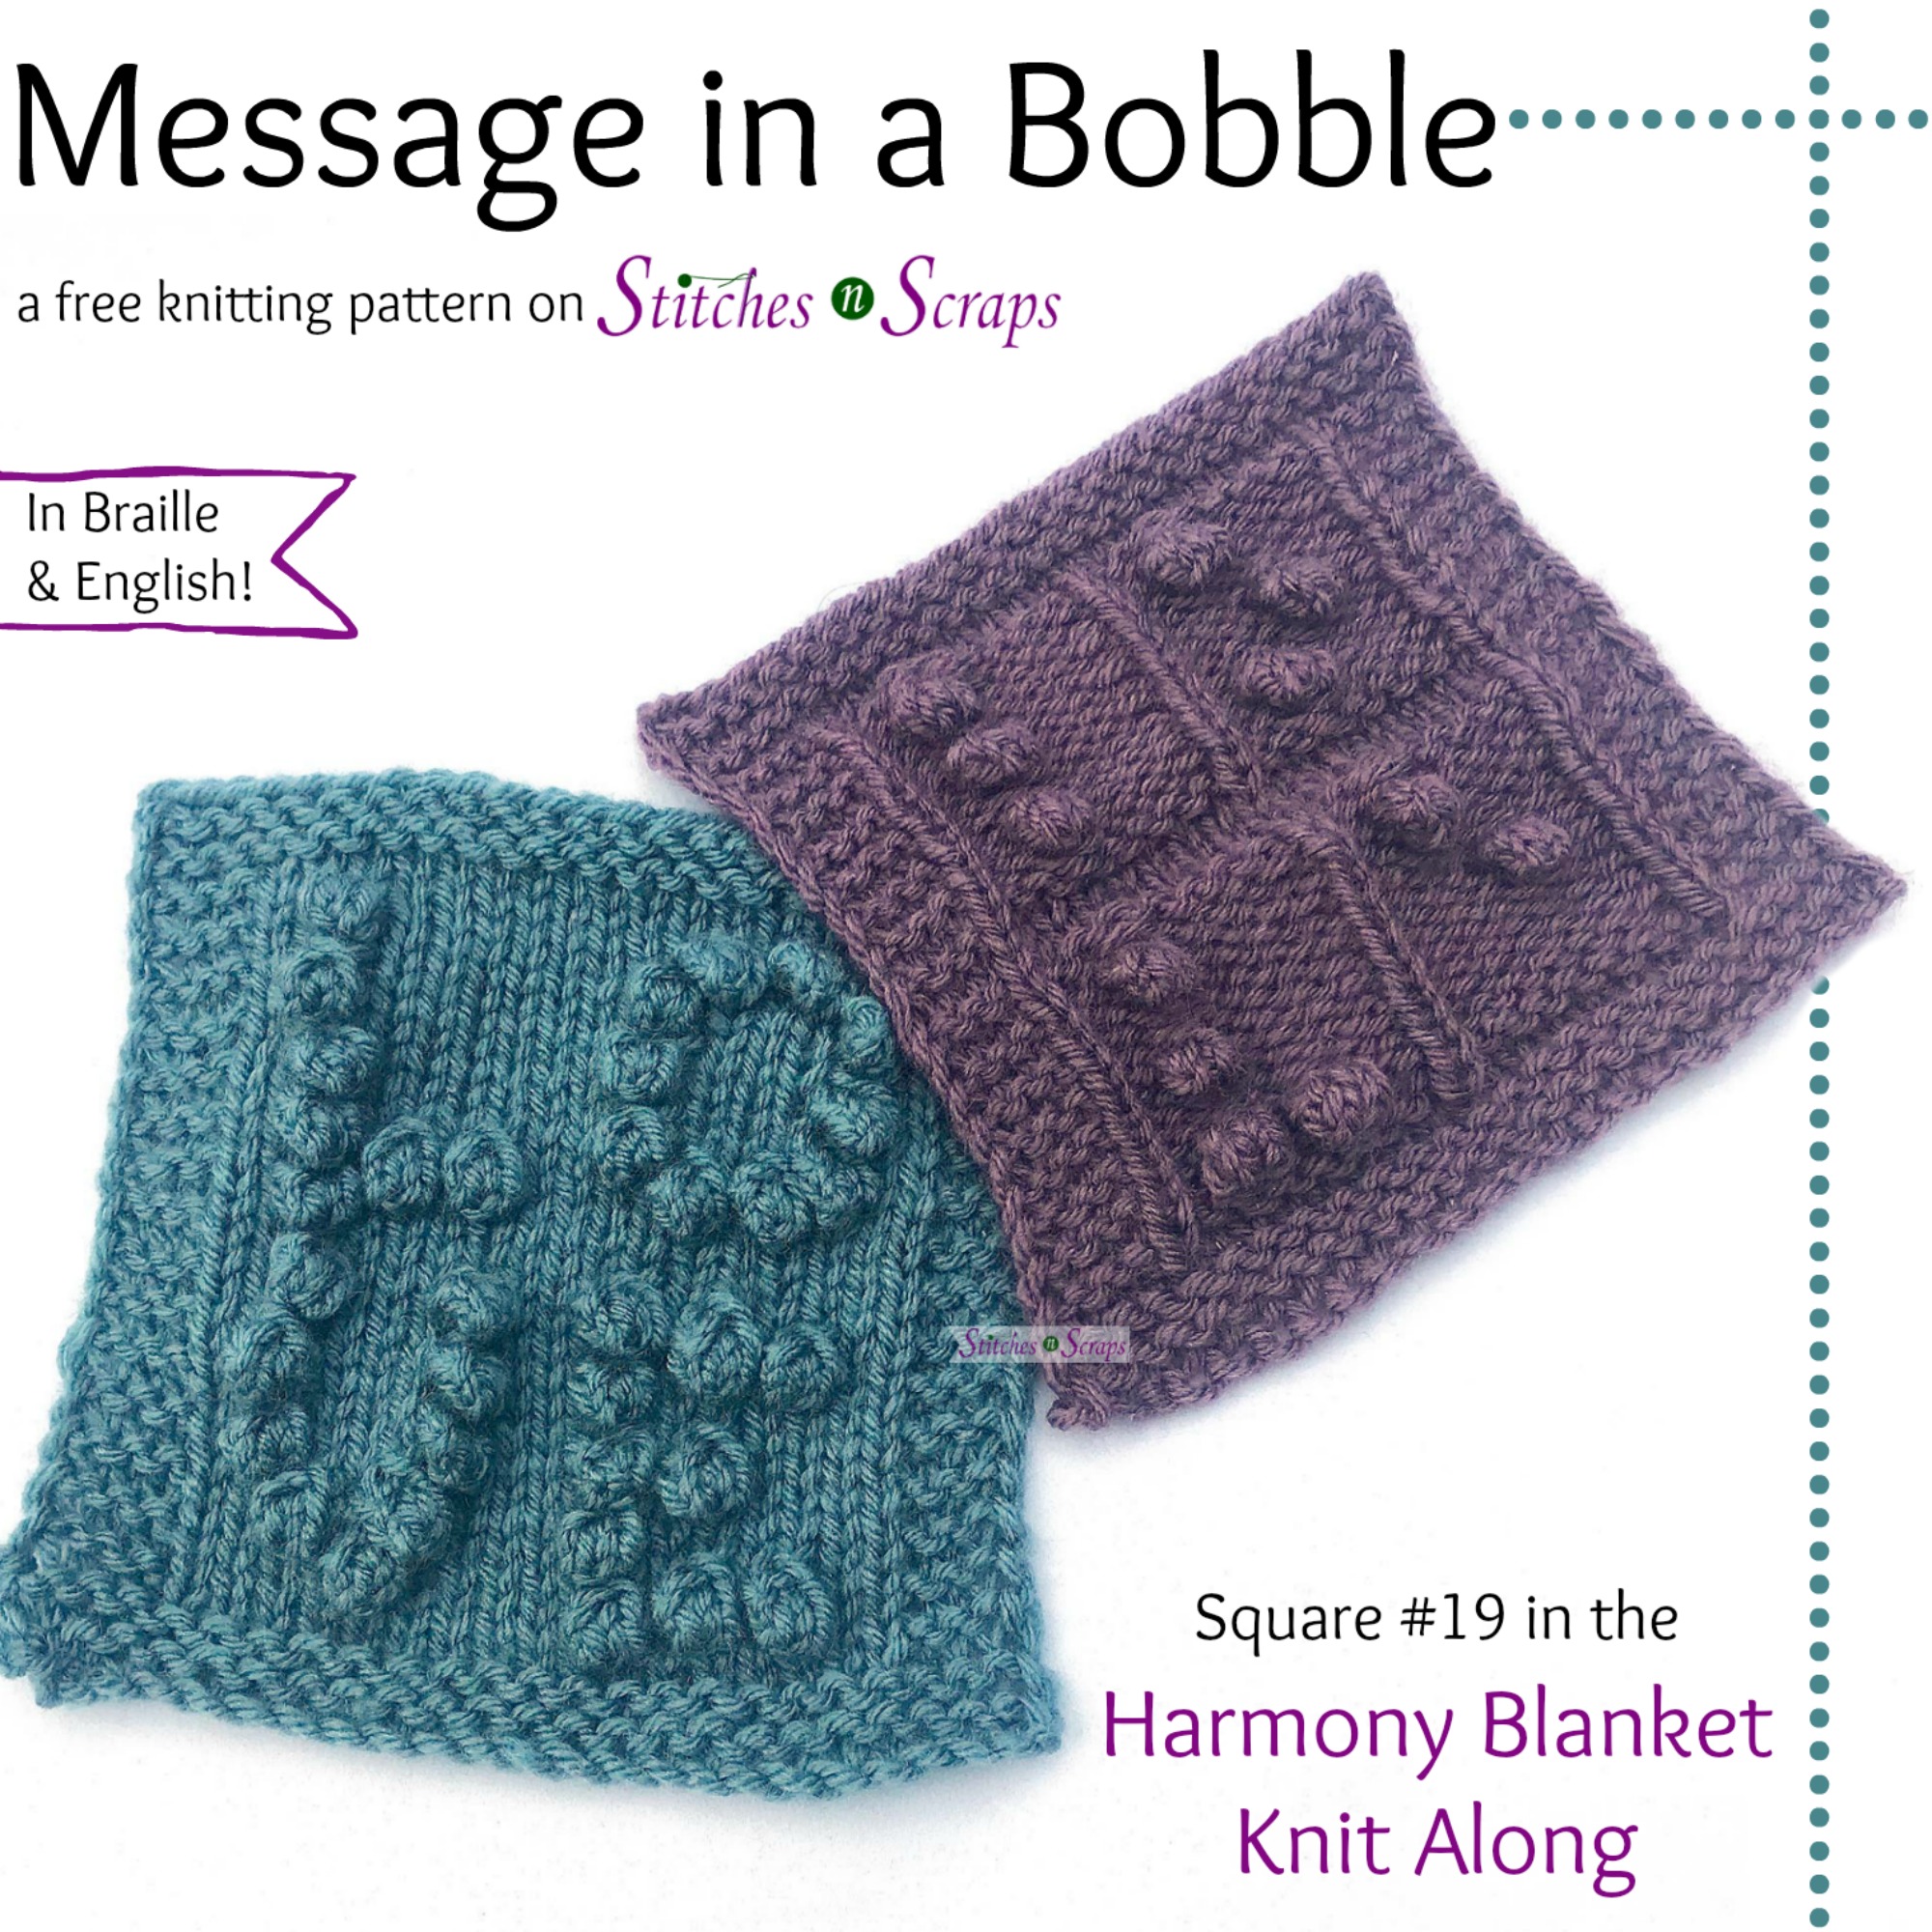 Message in a Bobble - a free knitting pattern on StitchesnScraps.com